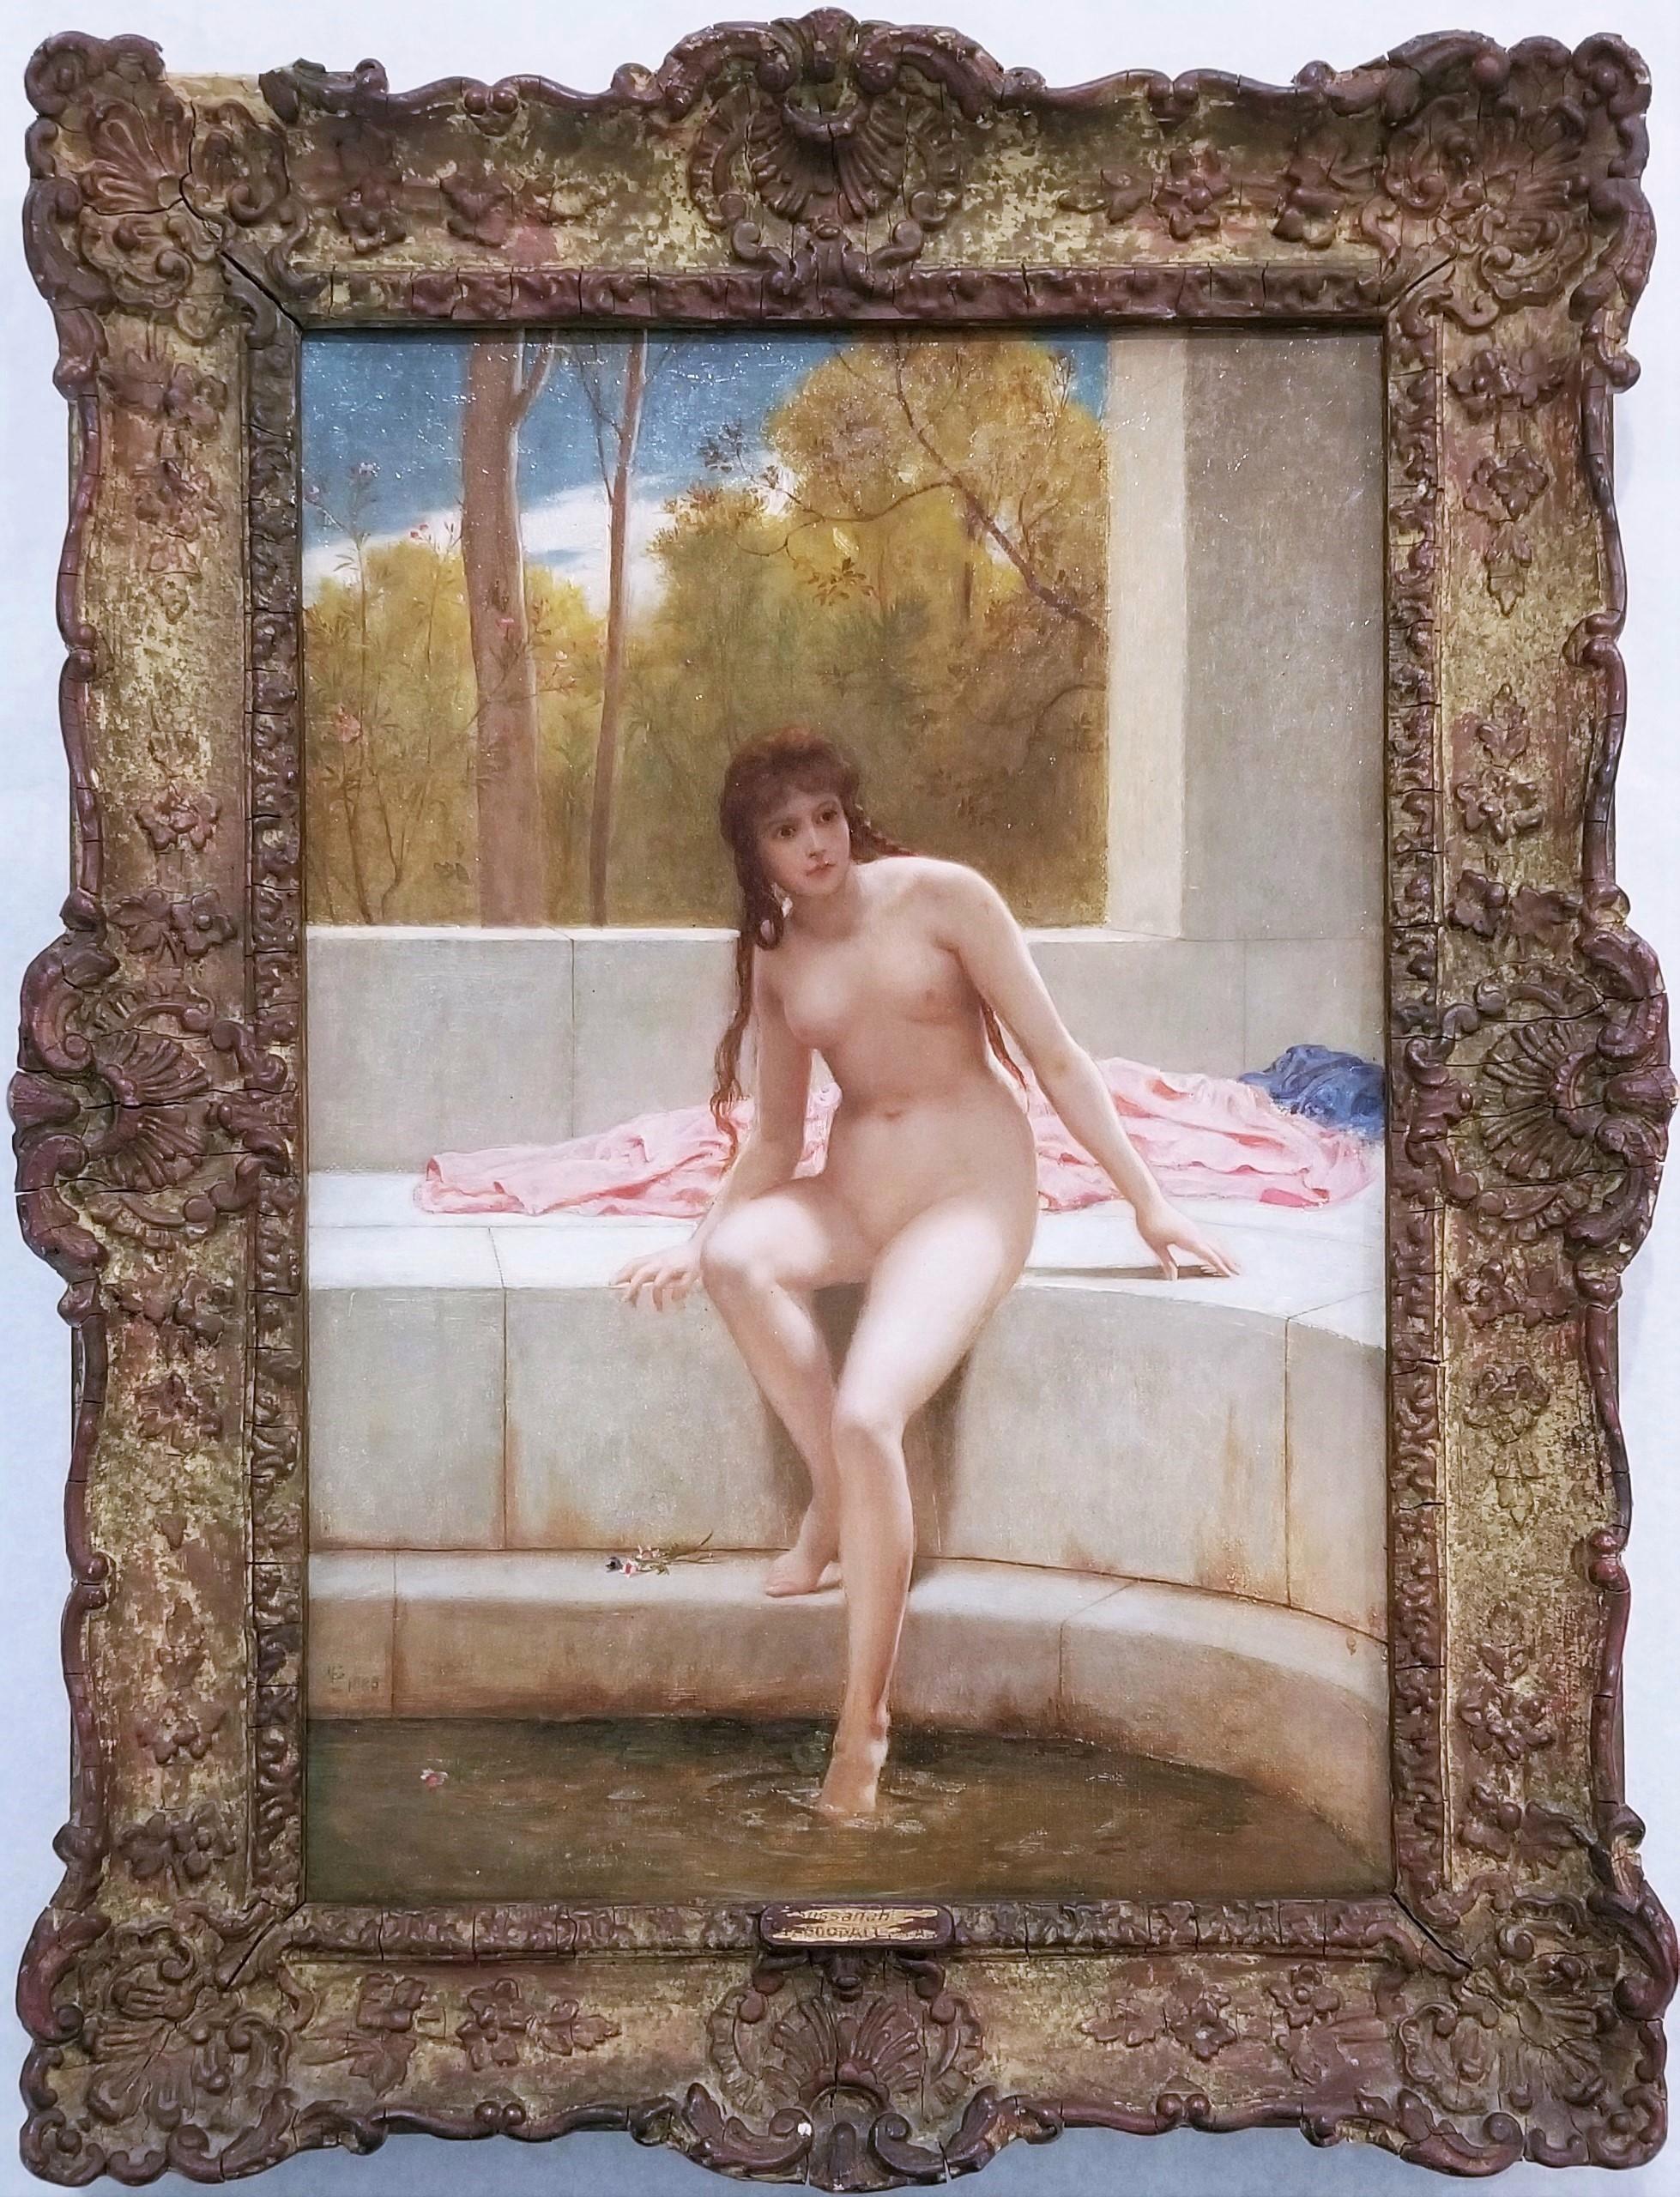 Susannah (Without the Elders) /// Old Masters British Nude Bath histoire biblique - Painting de Frederick Goodall R.A.